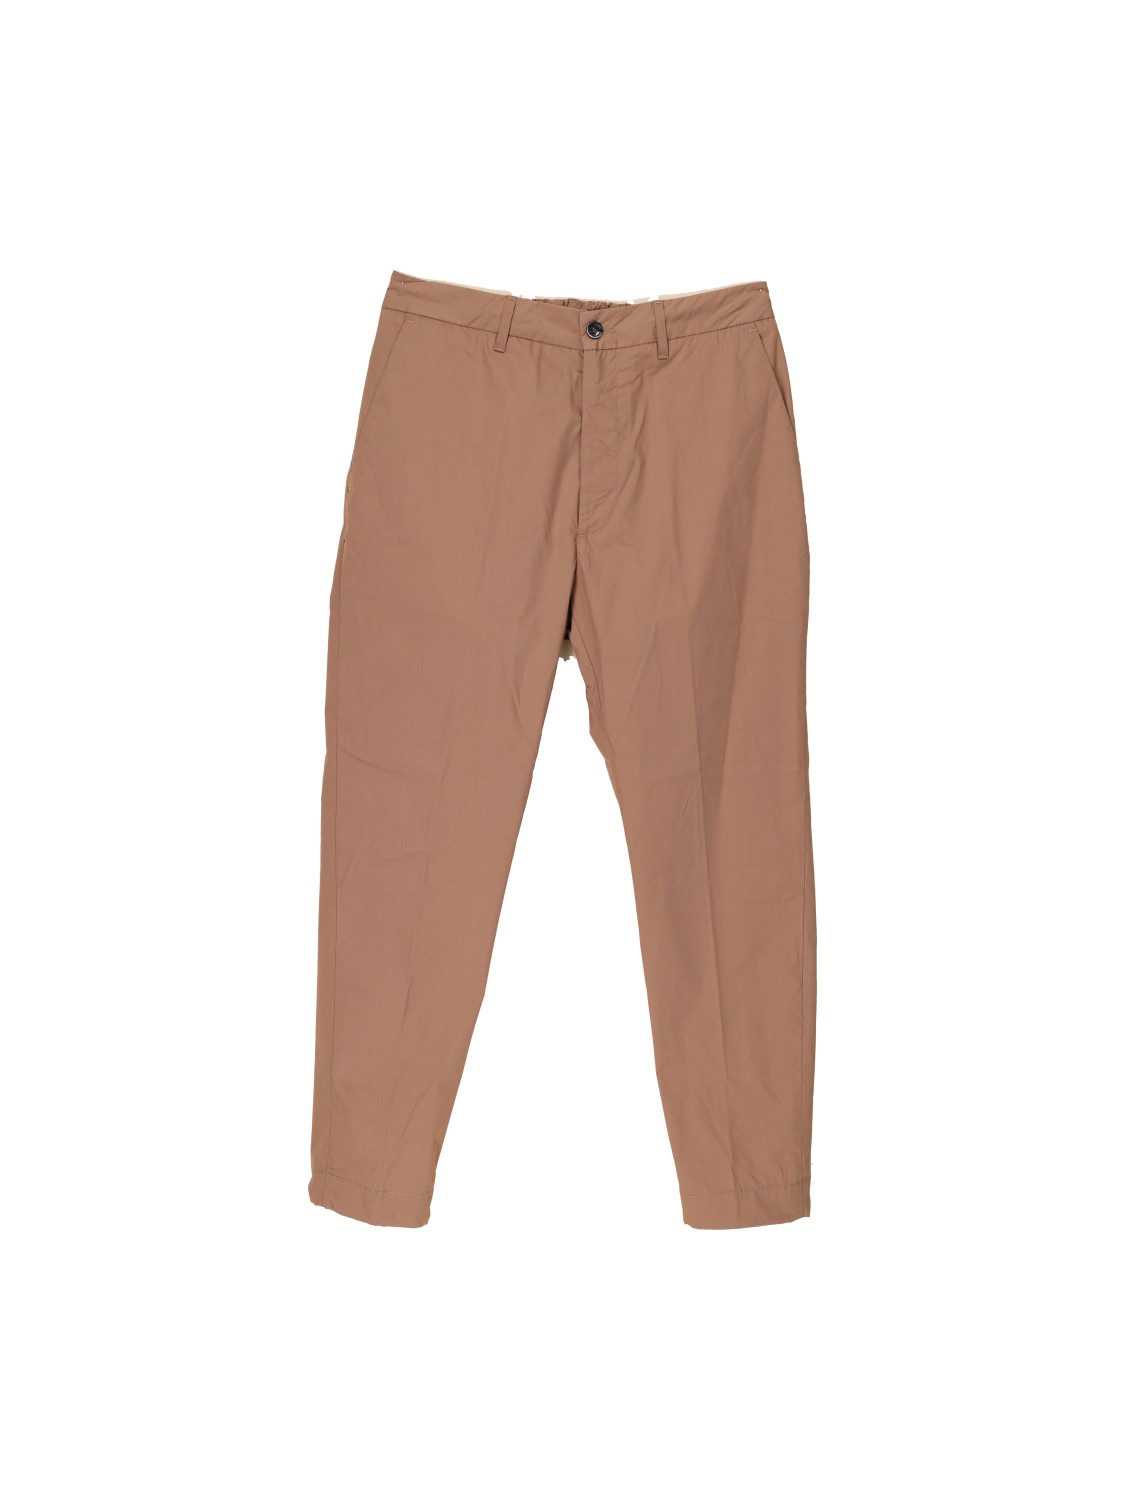 nine in the morning Yoga – cotton blend trousers in chino style  camel 46